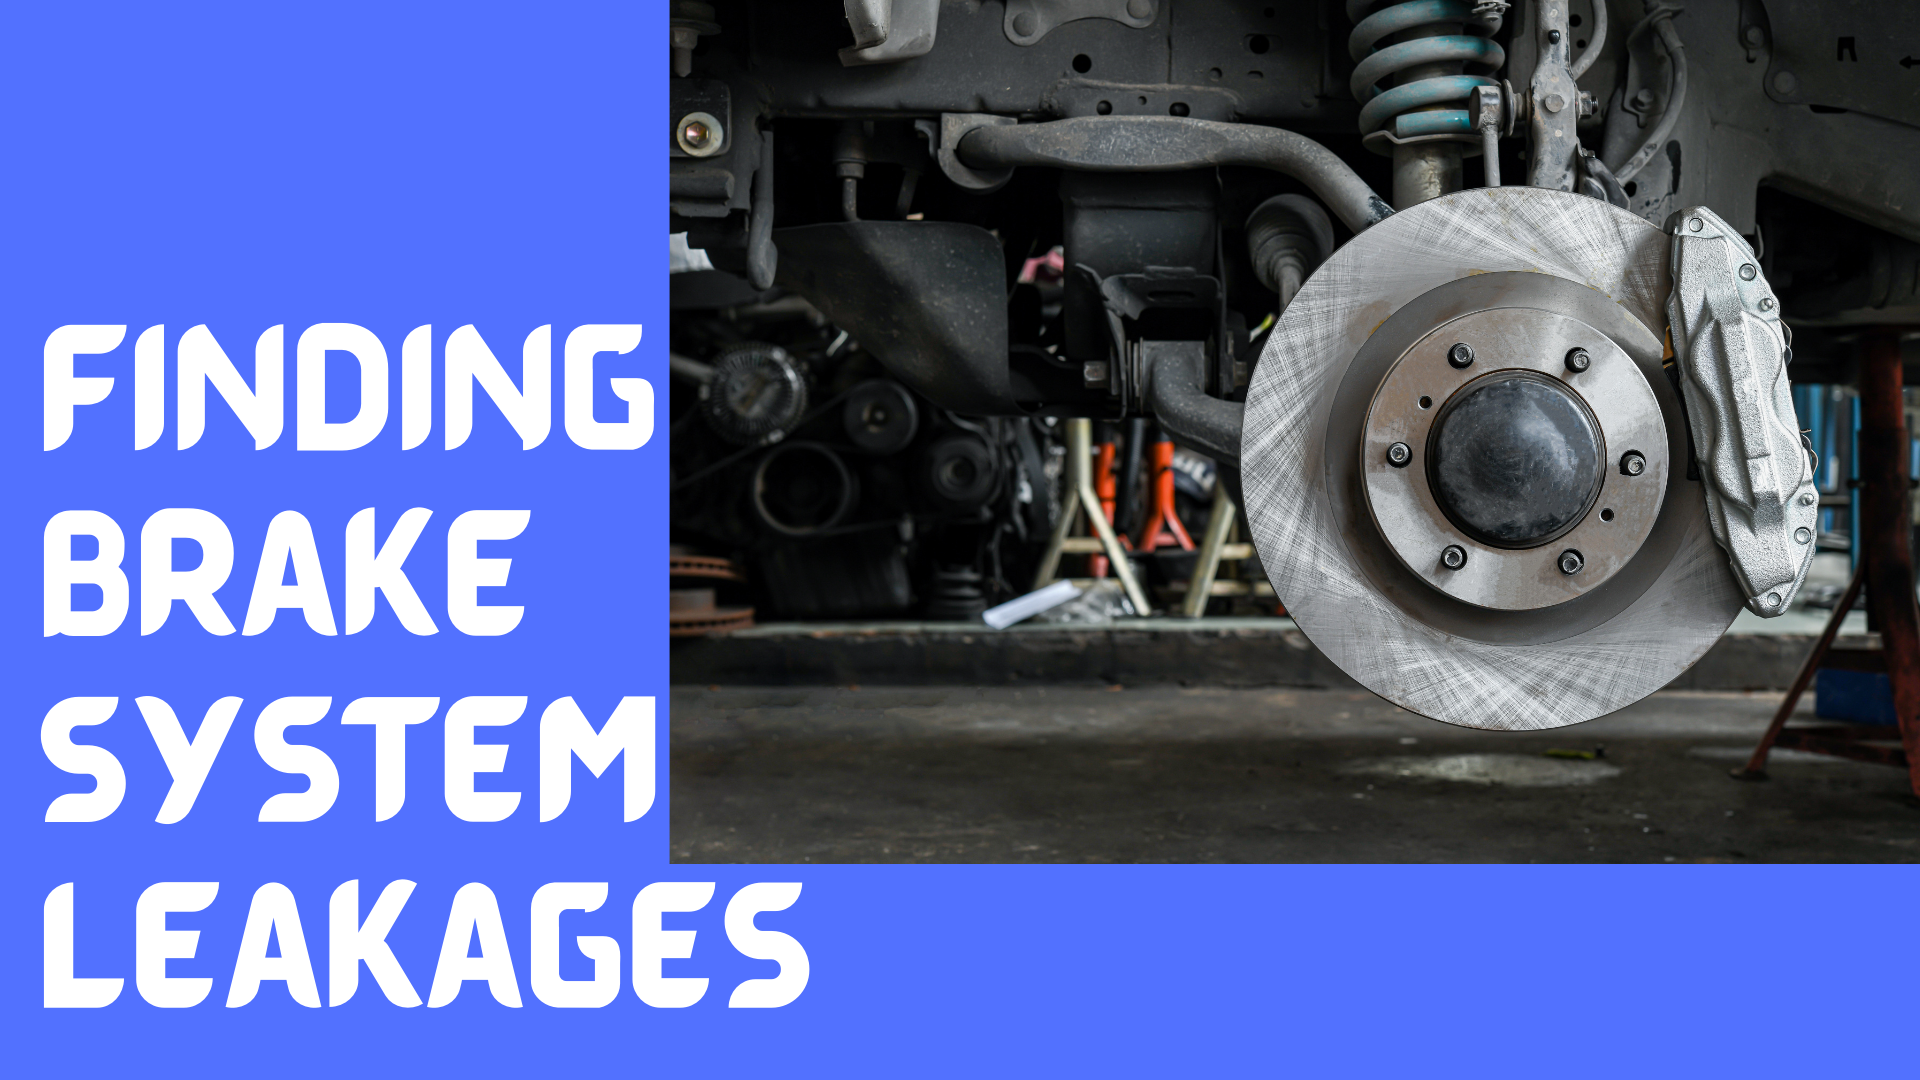 How To Find Leaks in the Brake System in a Truck Easily